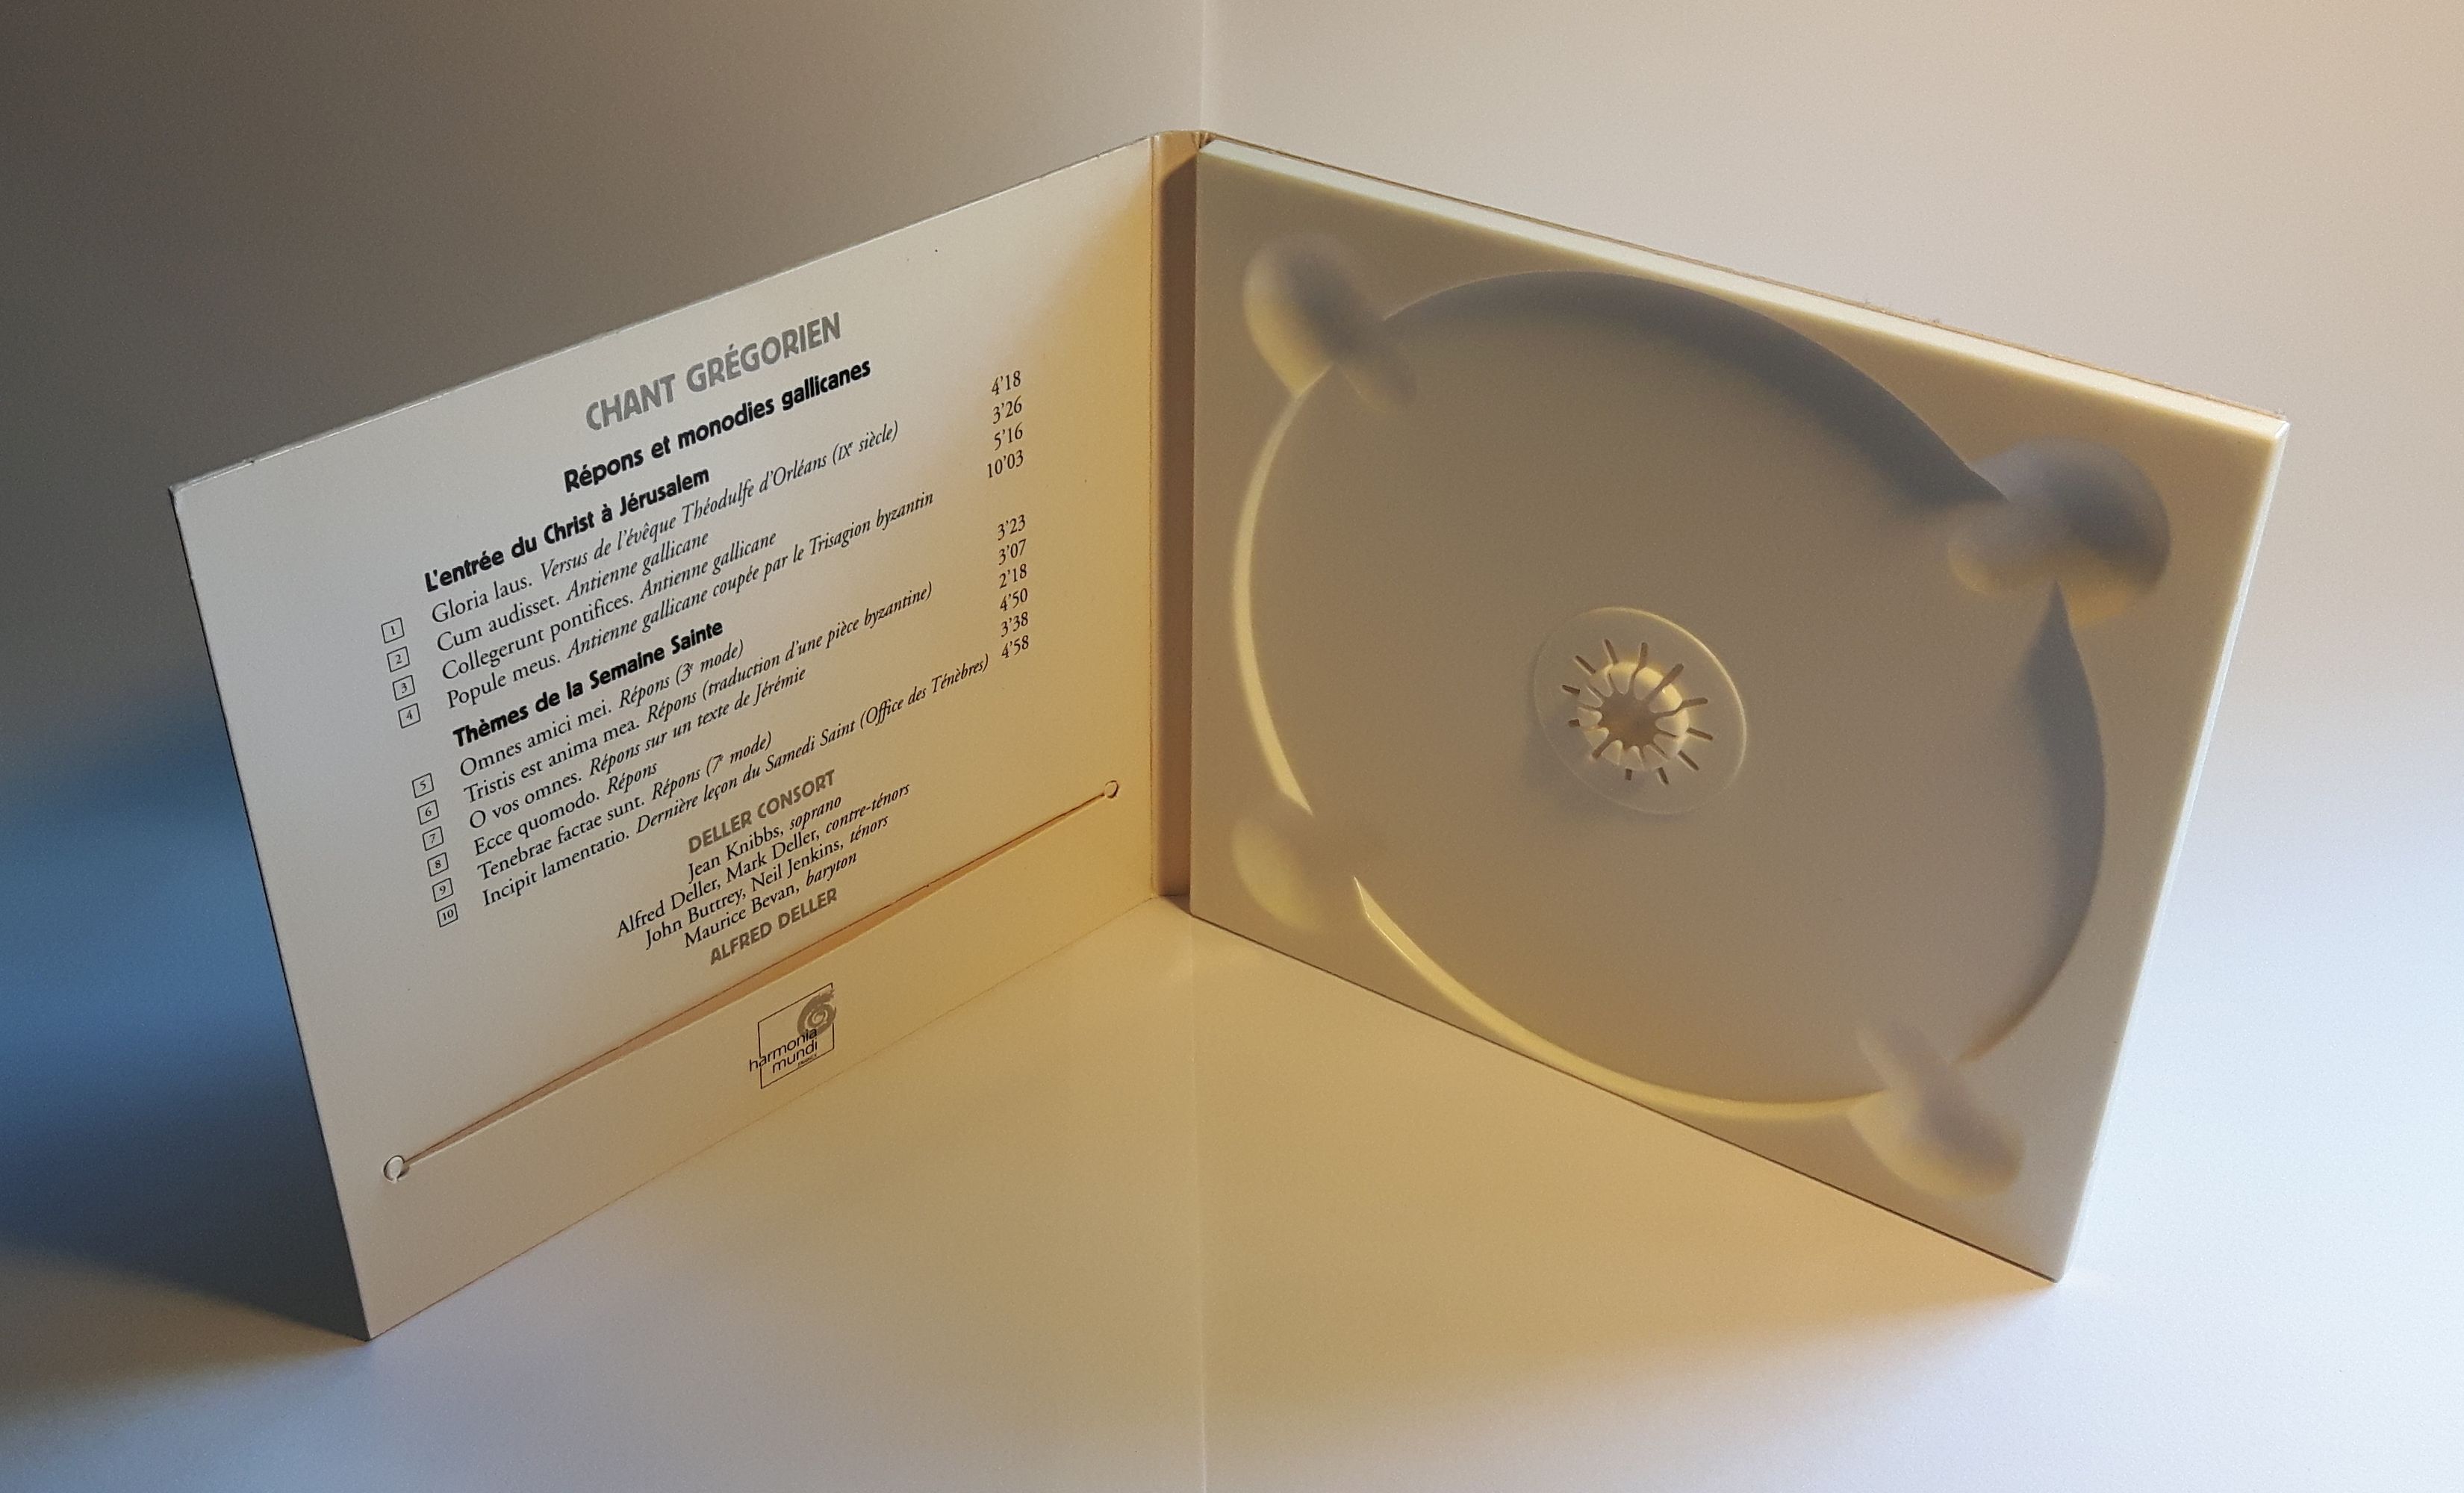 digibook 2 cd replication with 12pp bookletdigibook 2 cd panels with 12pp booklet</a>12pp booklet o we could do great laughters, if you remain compliant wh cd duplication 2 with <a href=